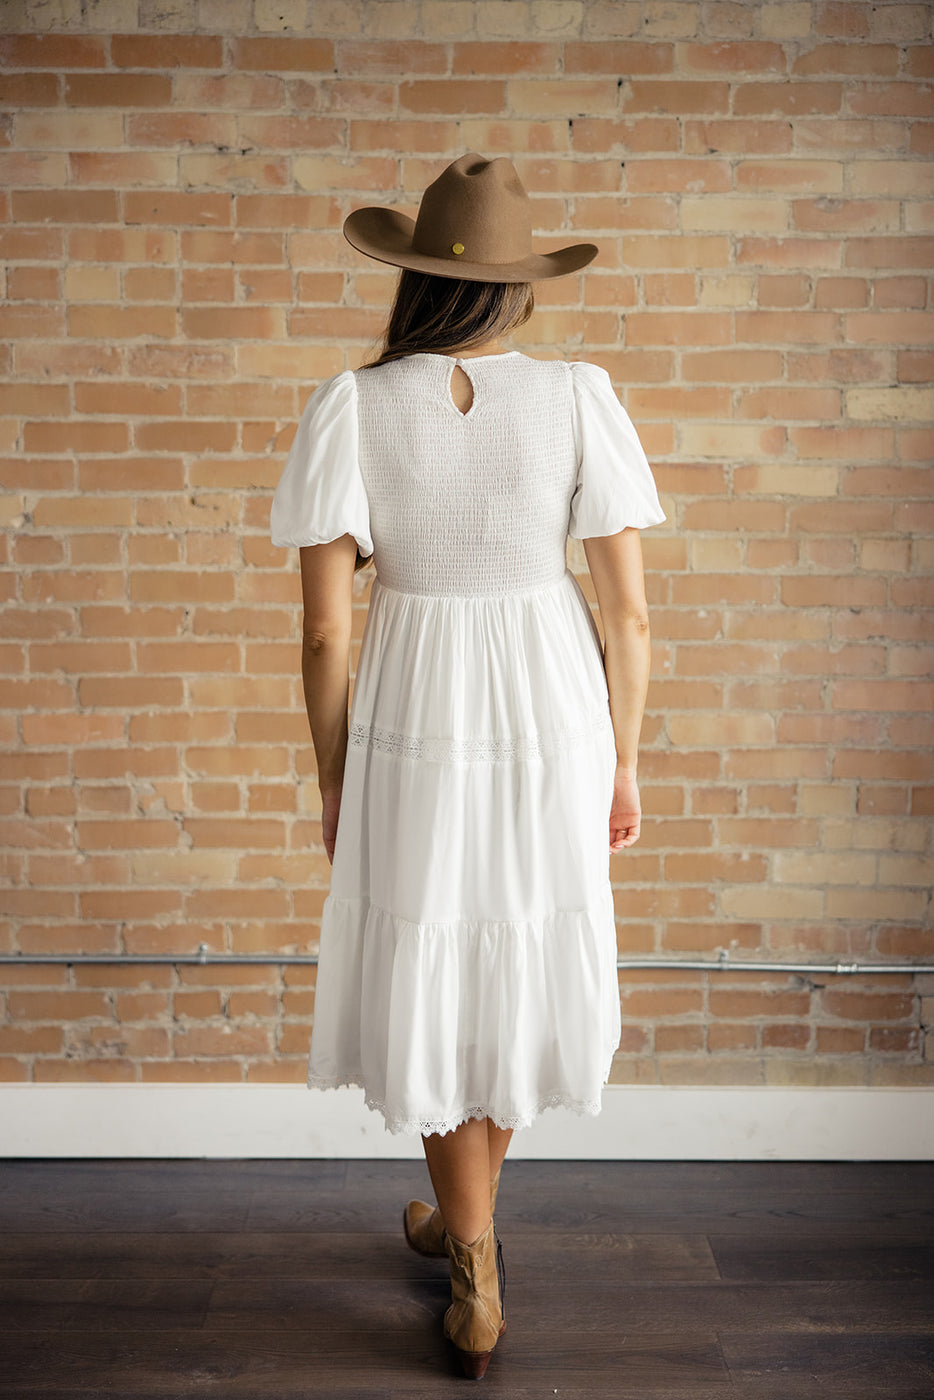 a woman in a white dress and brown hat